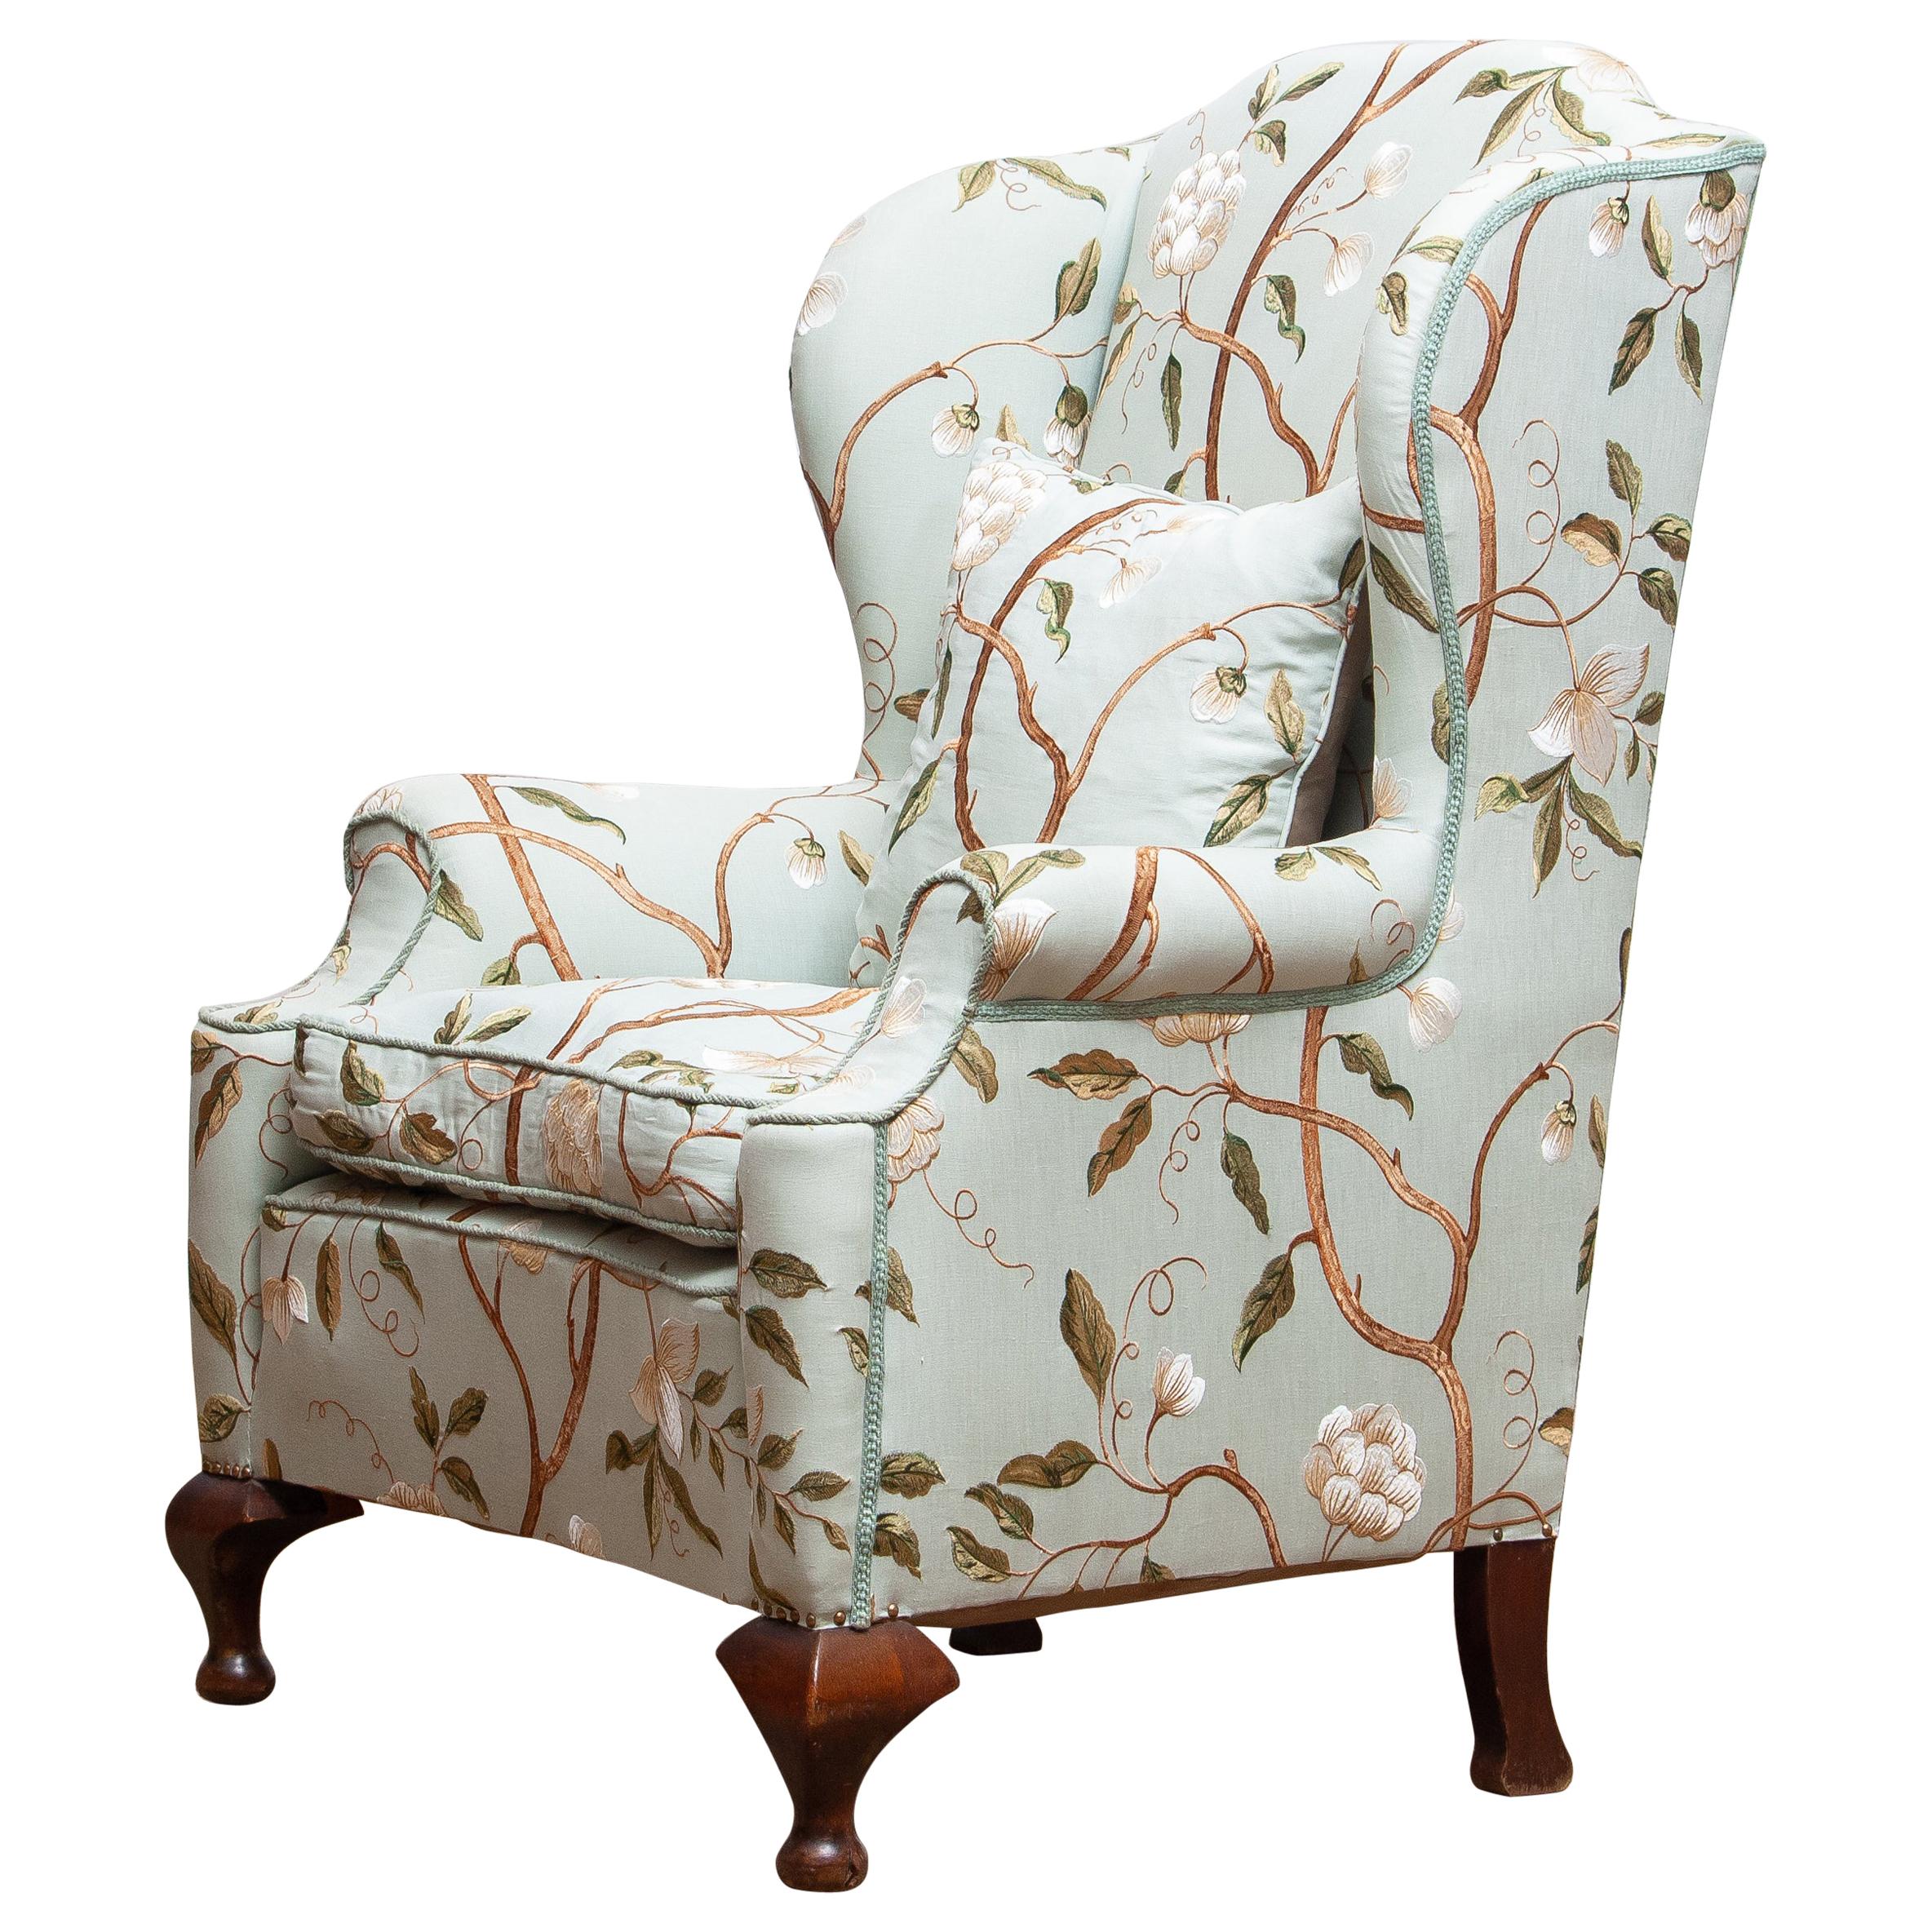 Georgian Style Wingback Chair with Embroidered Fabric, "Completely Restored"